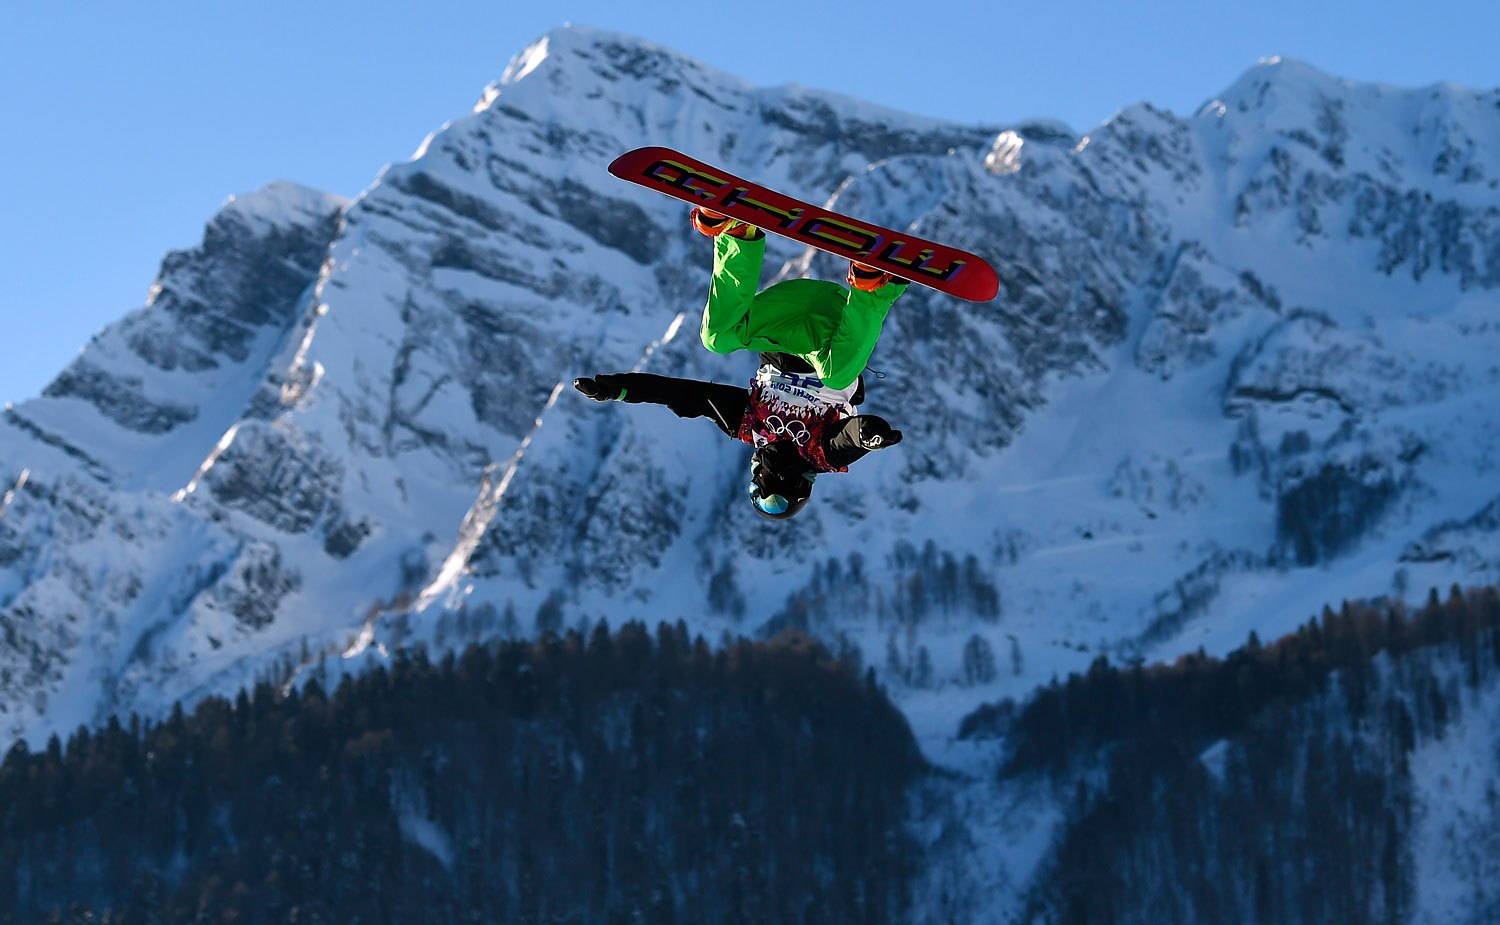 Ireland's Seamus O'Connor performs a jump during the men's snowboard slopestyle semi-final competition in Rosa Khutor, Feb. 8, 2014.